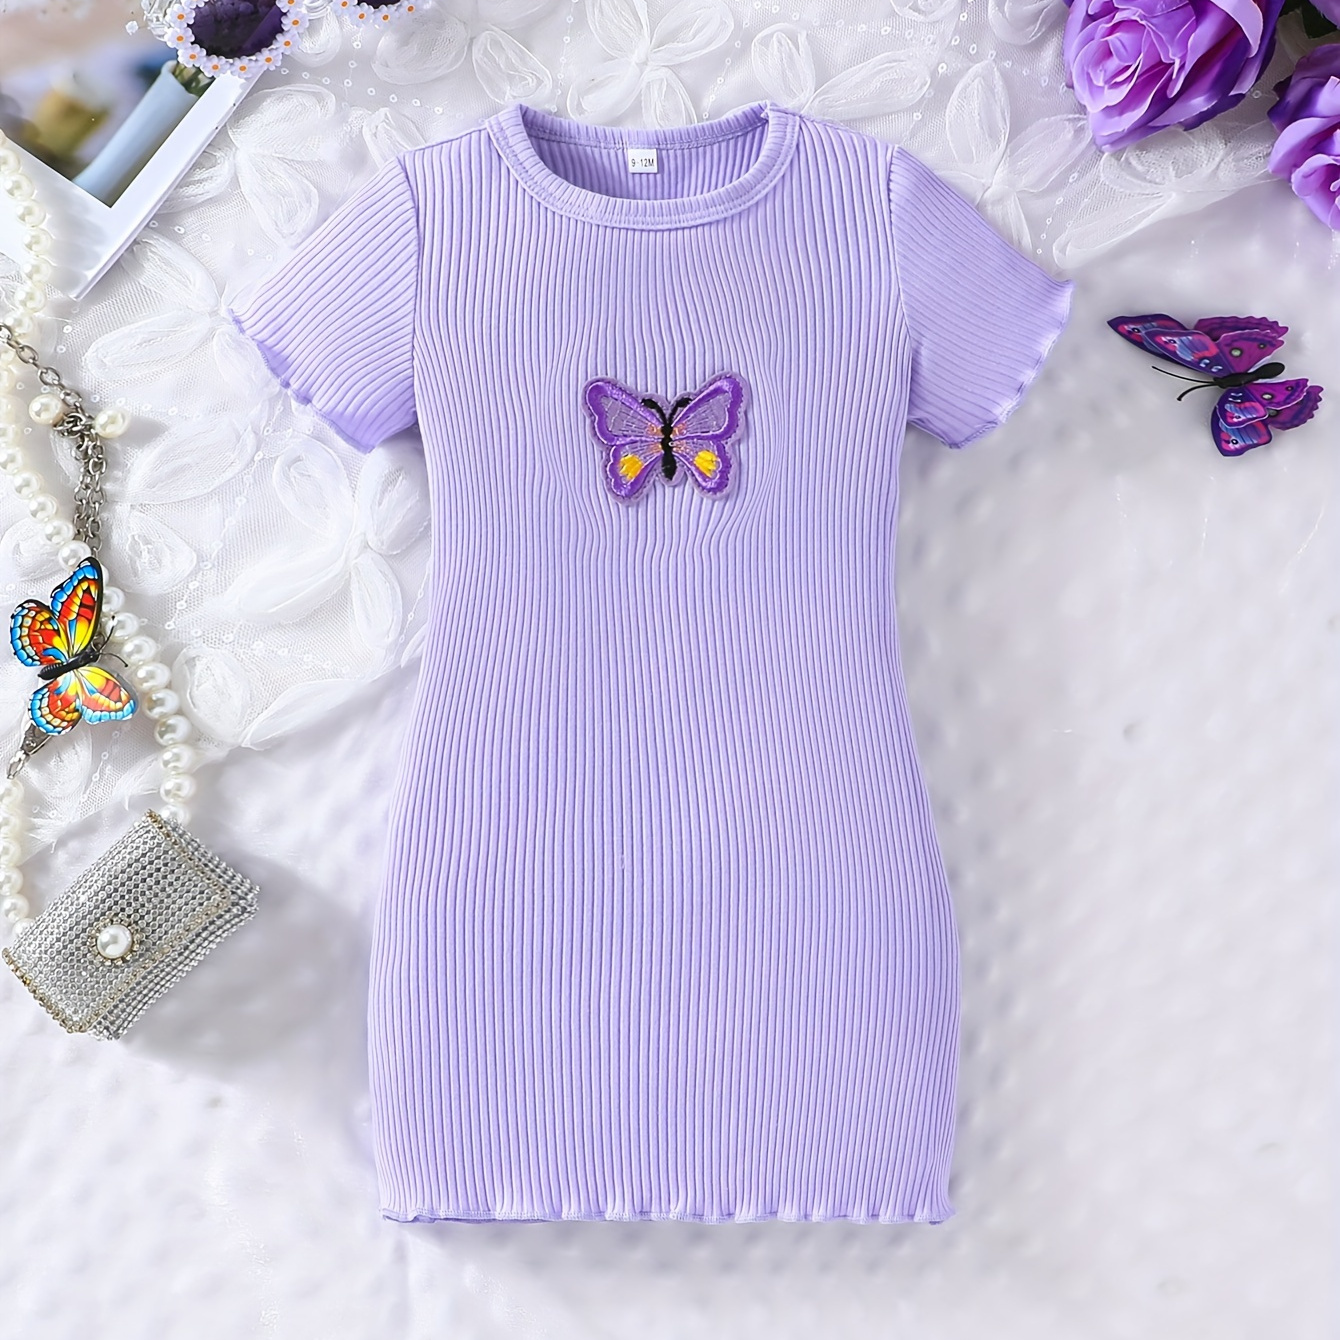 

Baby's Butterfly Embroidered Ribbed Cotton Short Sleeve Dress, Infant & Toddler Girl's Clothing For Summer/spring, As Gift